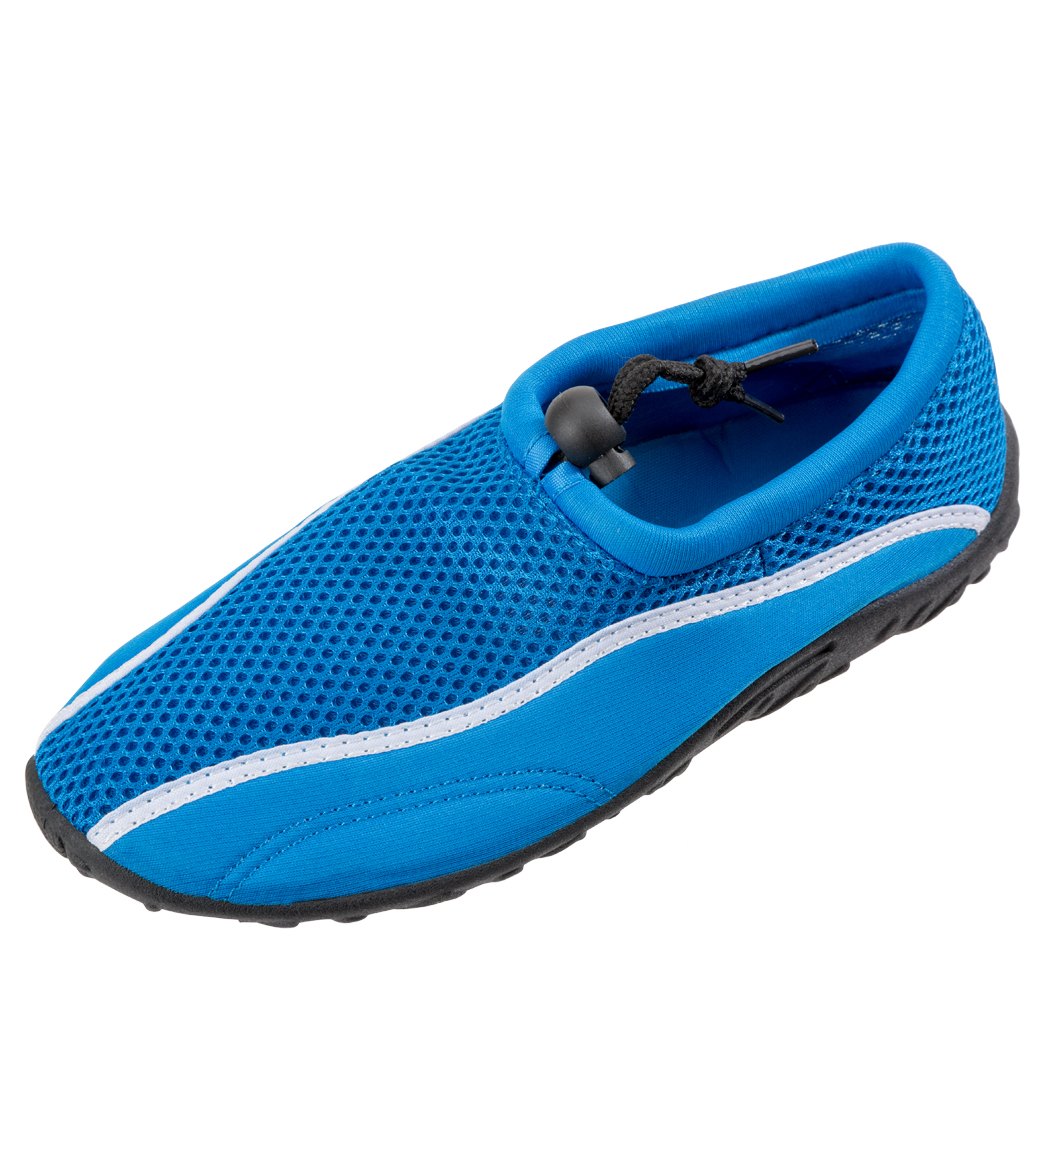 Sporti Women's Adjustable Water Shoes at SwimOutlet.com